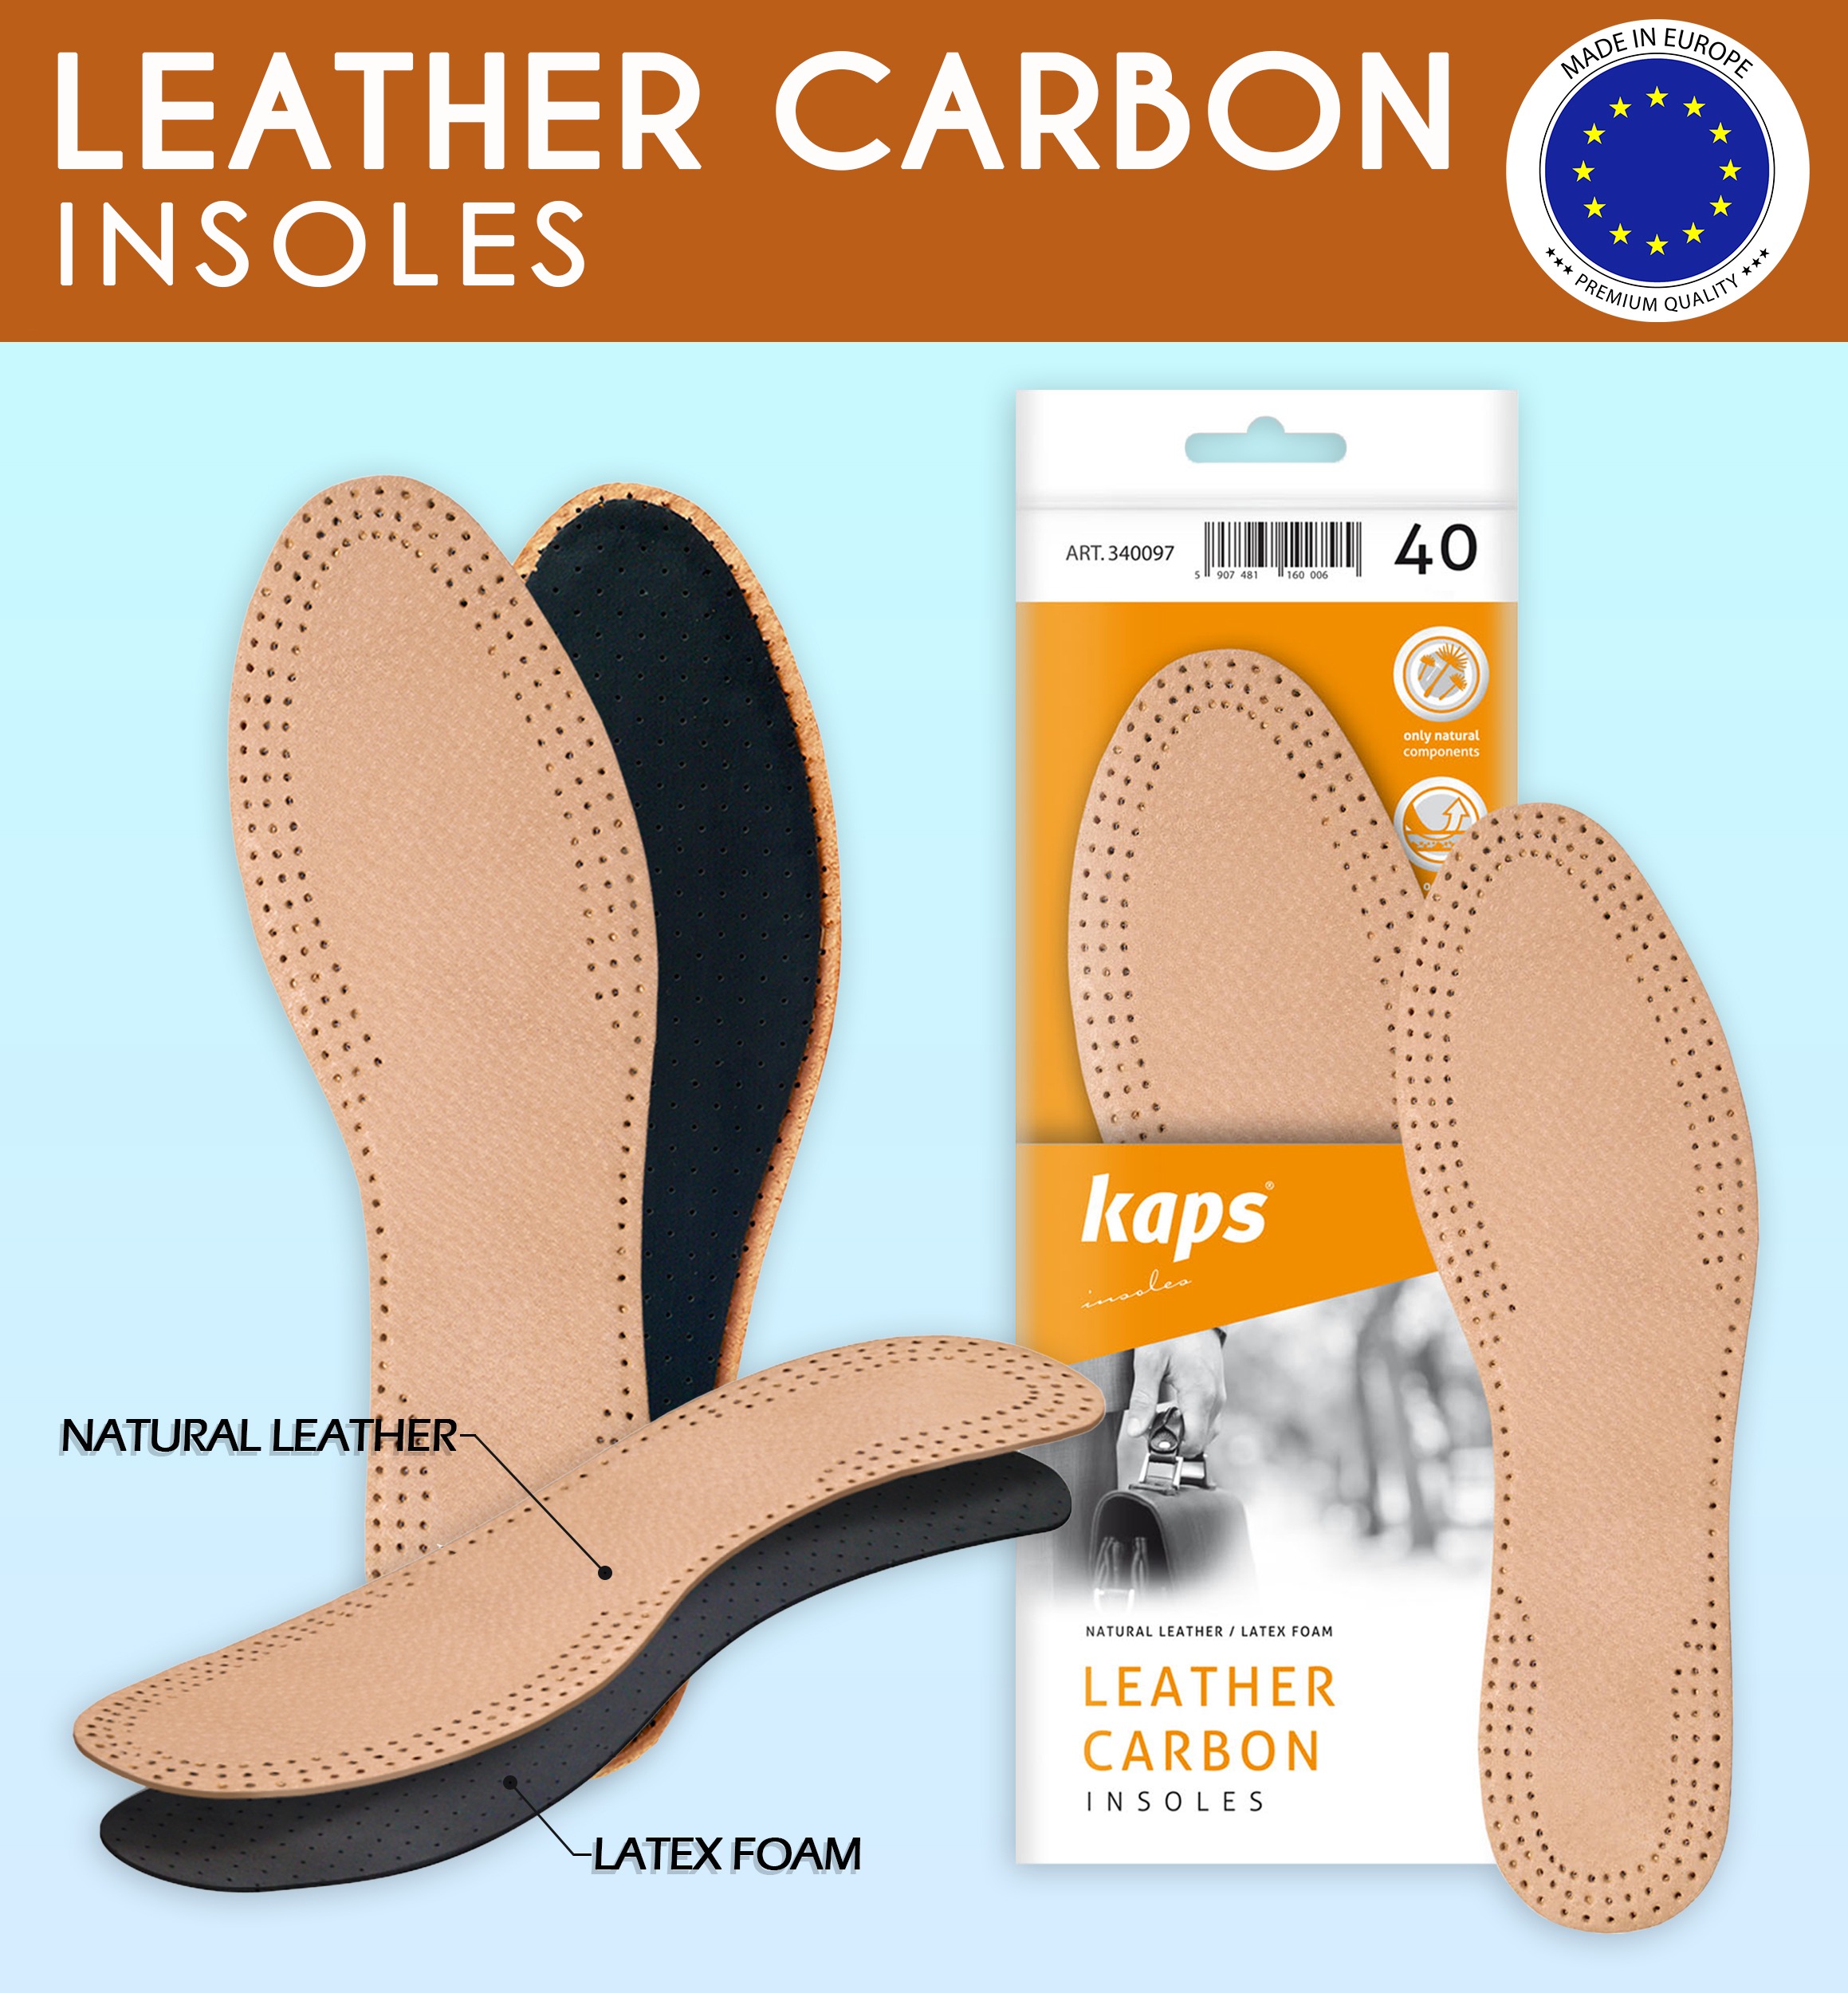 Natural leather insoles for ladies with 